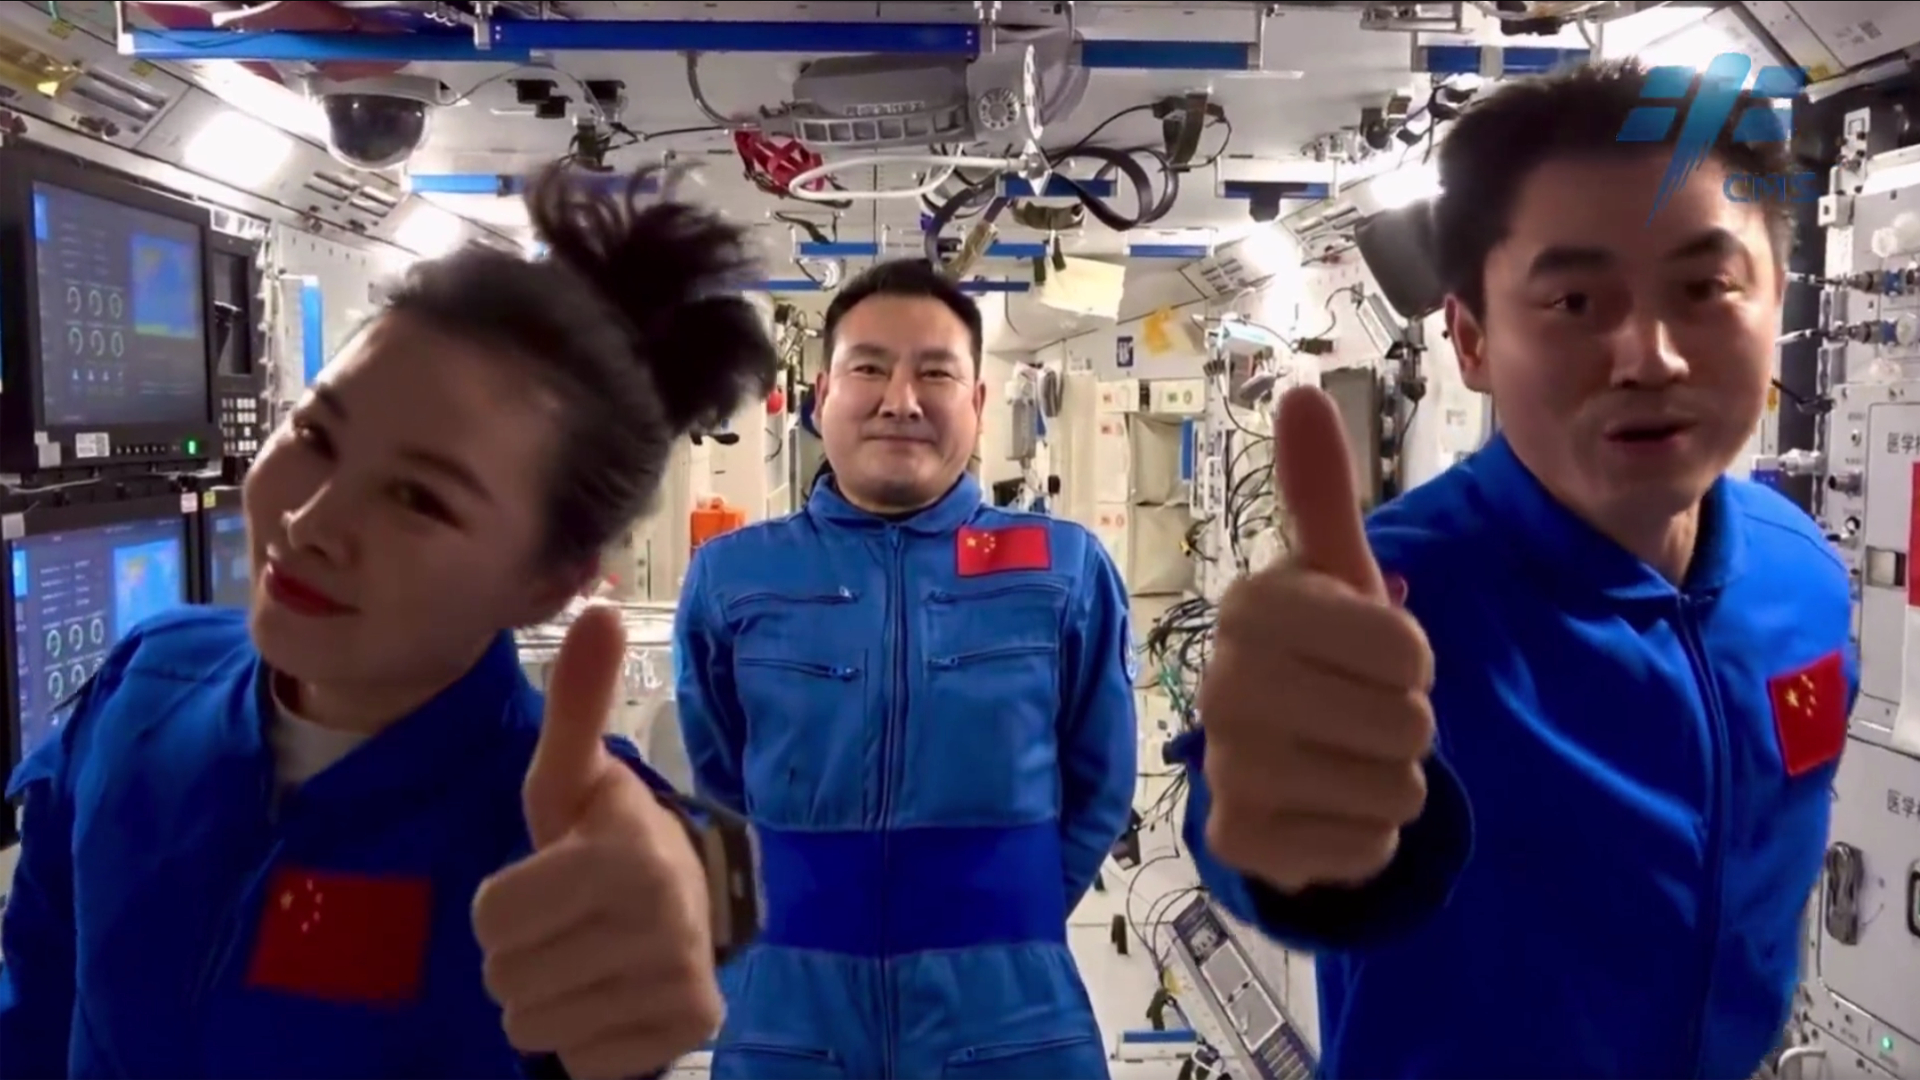 China's Shenzhou 13 astronauts give thumb's up signs as they prepare to return to Earth from the Tiangong space station core module Tianhe in April 2022. They are (from left): Wang Yaping; commander Zhai Zhigang; and Ye Guangfu.